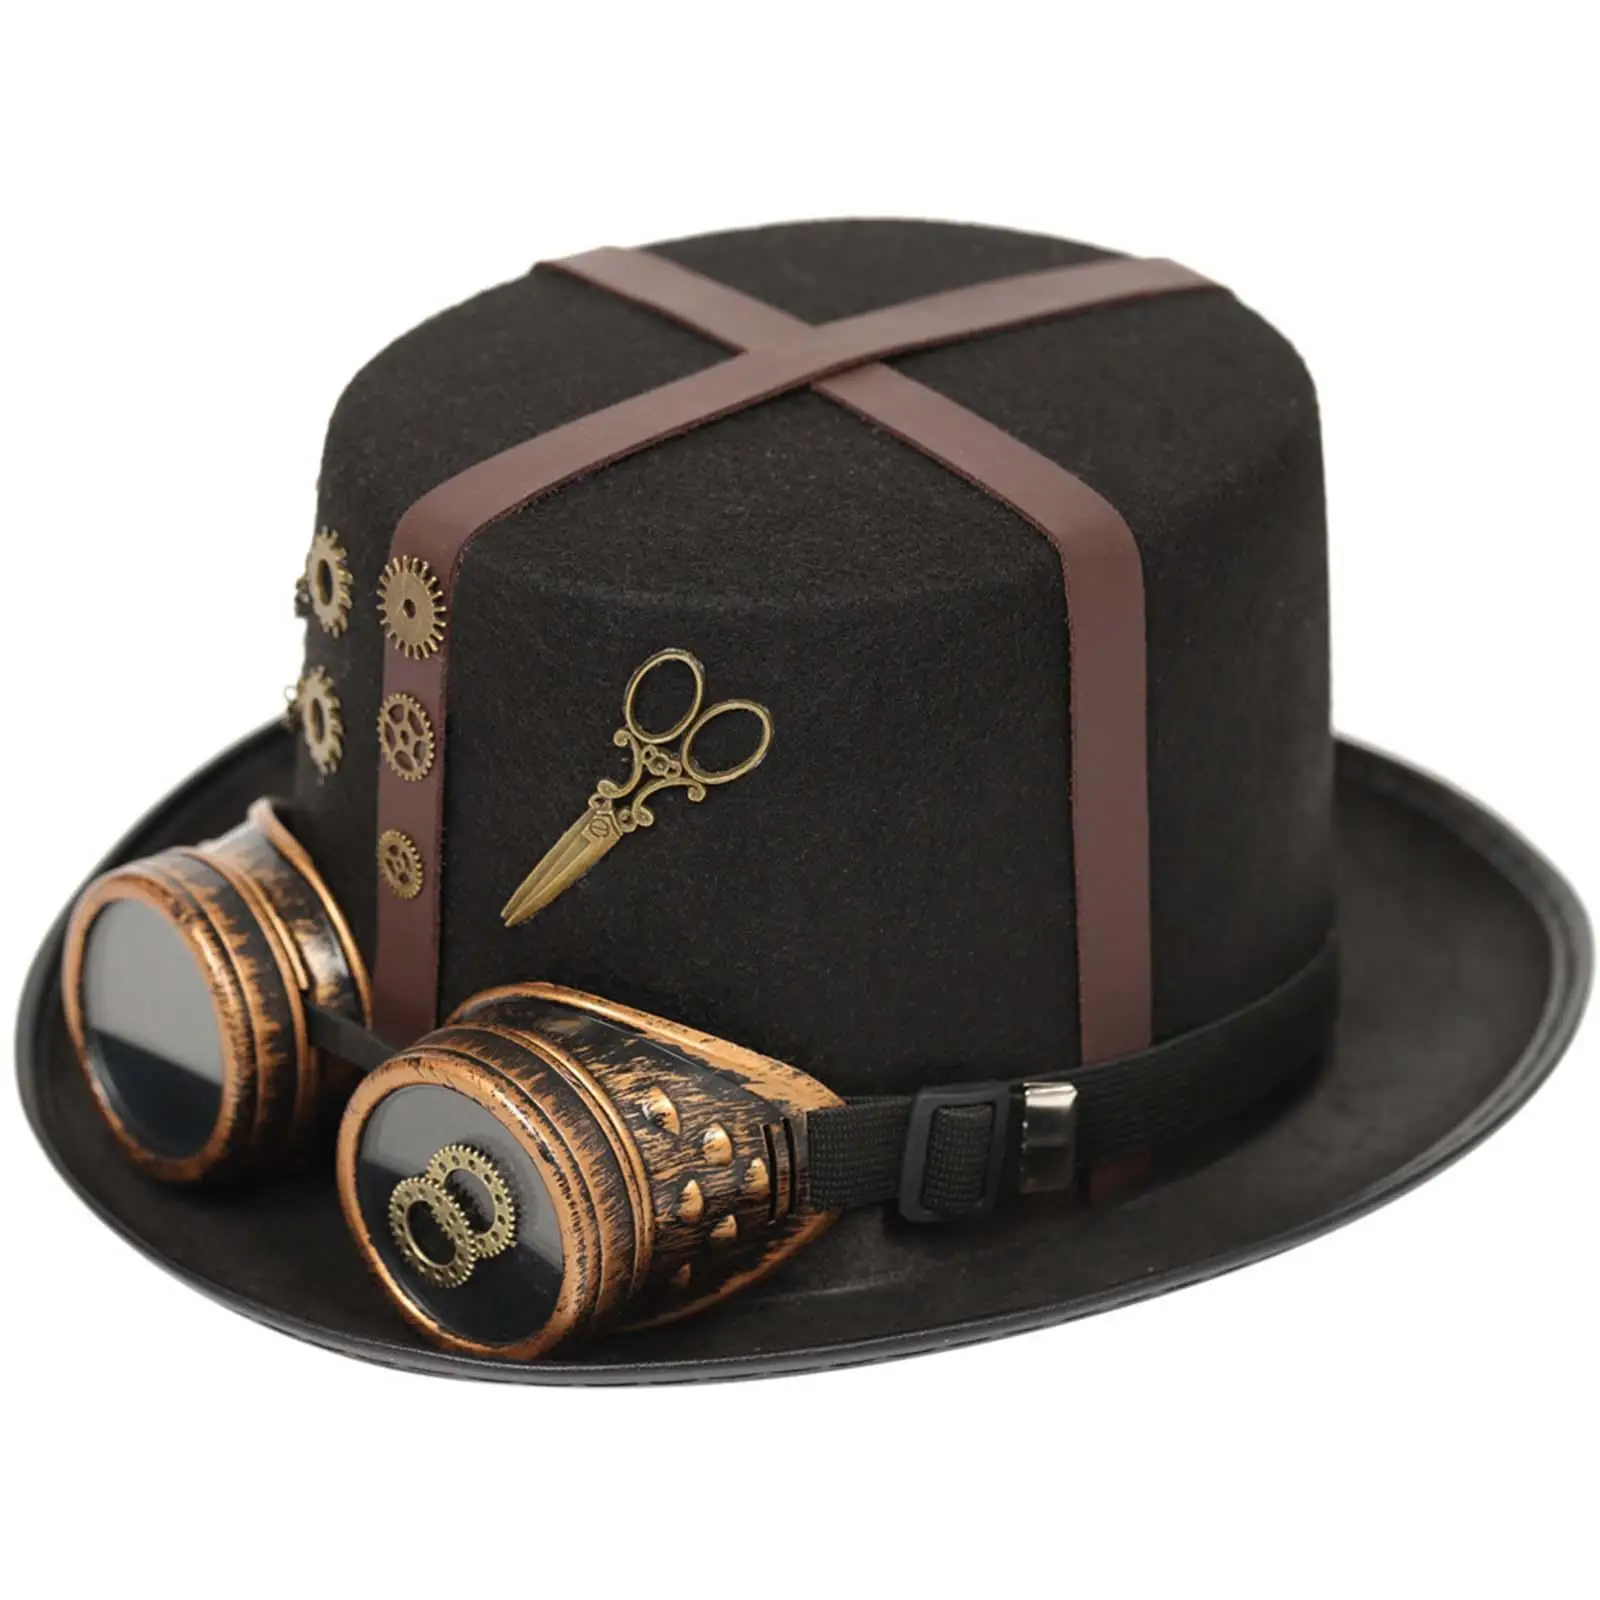 Retro Style Steampunk Top Hat Head Wear Wide Brim Costume Accessories Dance Hat for Cosplay Magician Decoration Holiday Adult